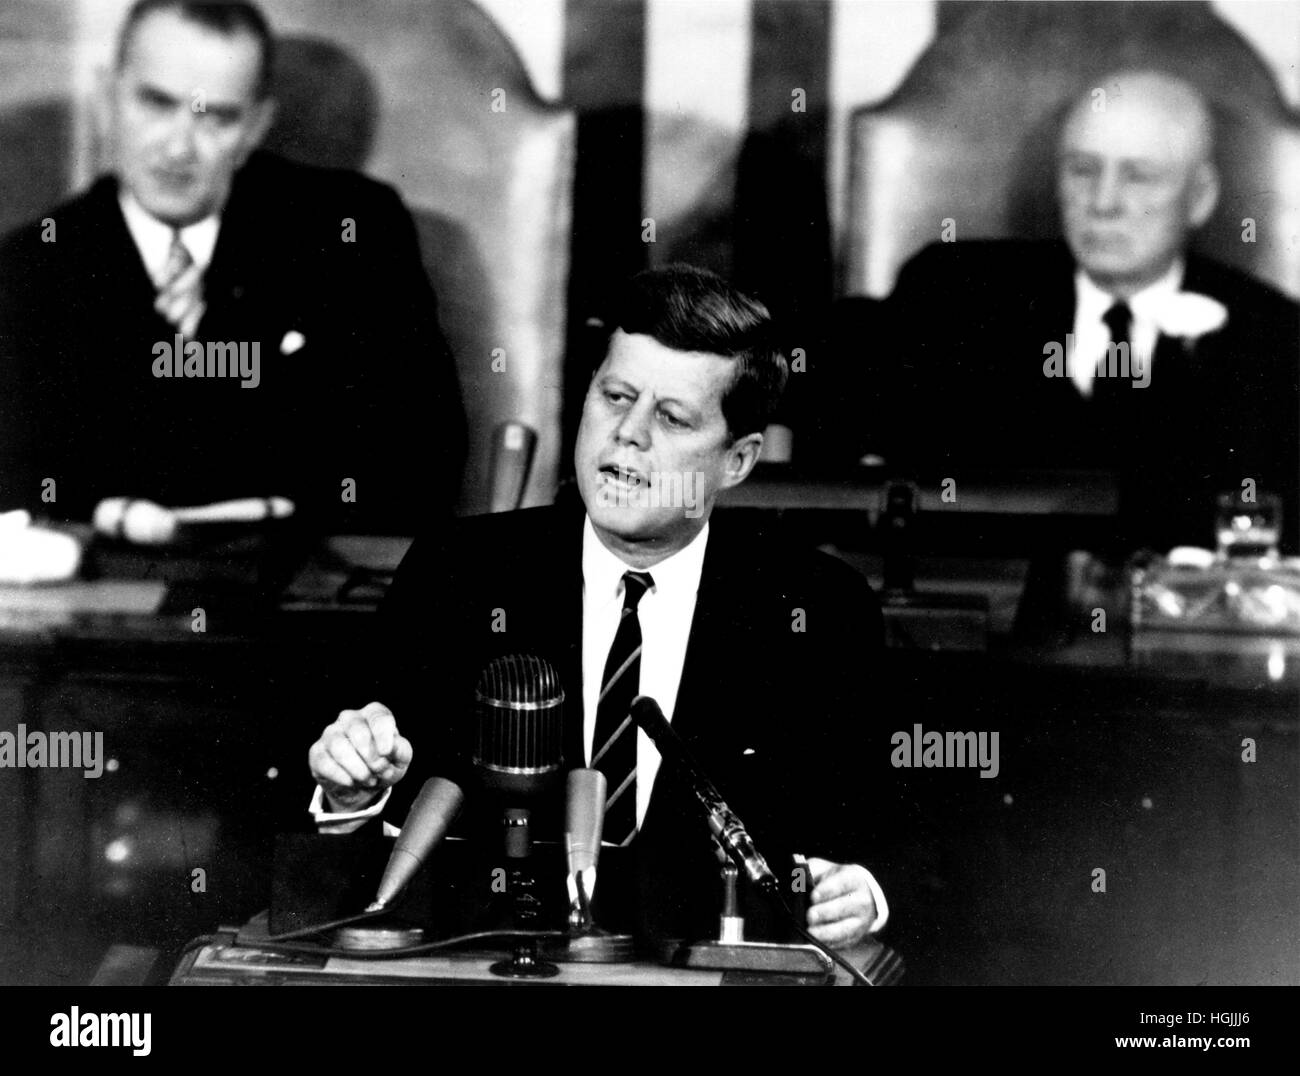 United States President John F. Kennedy outlined his vision for manned exploration of space to a Joint Session of the United States Congress, in Washington, DC on May 25, 1961 when he declared, '.I believe this nation should commit itself to achieving the goal, before this decade is out, of landing a man on the Moon and returning him safely to the Earth.' This goal was achieved when astronaut Neil A. Armstrong became the first human to set foot upon the Moon at 10:56 p.m. EDT, July 20, 1969. Shown in the background are, (left) Vice President Lyndon Johnson, and (right) Speaker of the House S Stock Photo